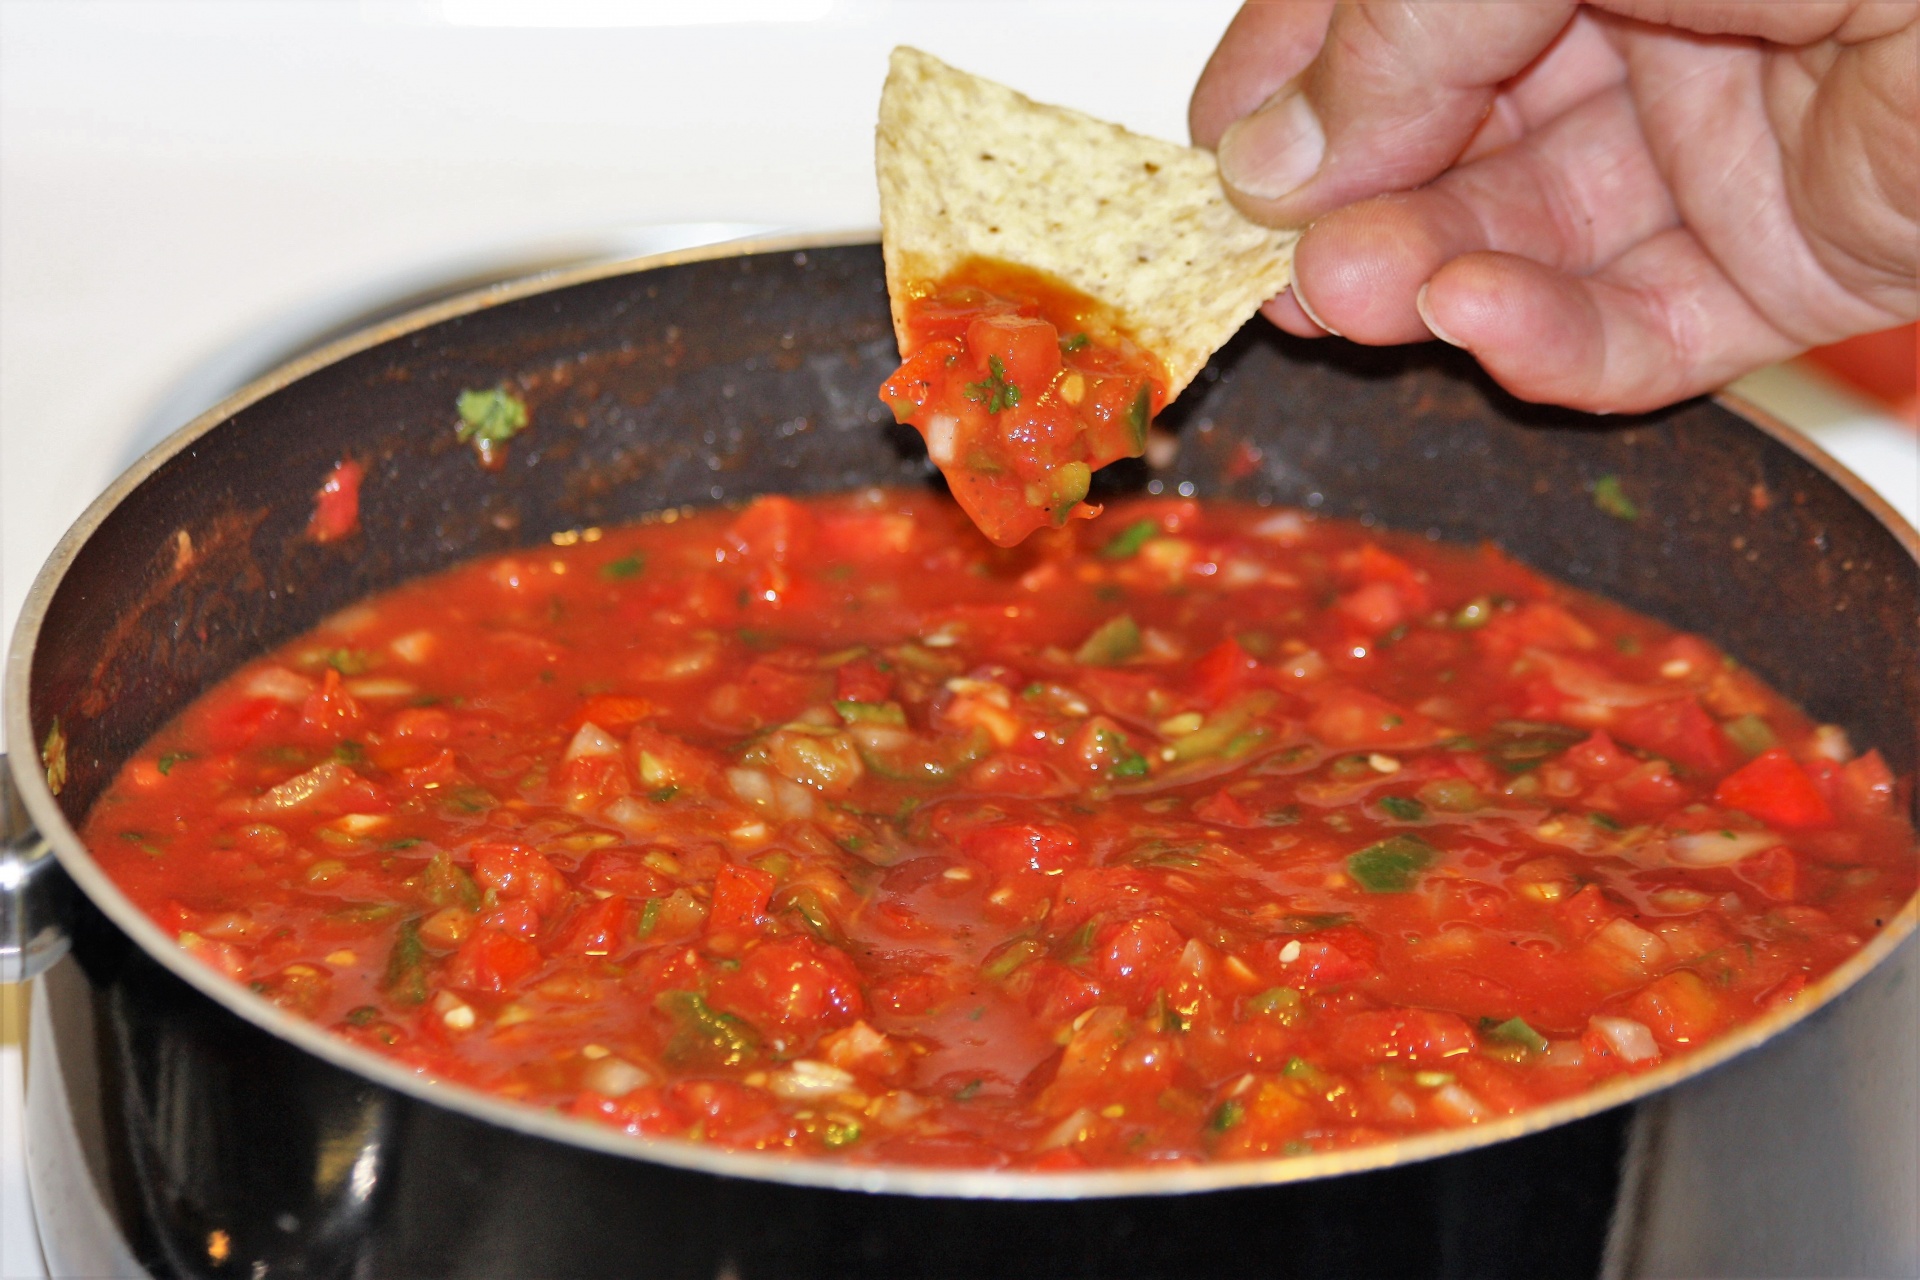 A man's hand is holding a tortilla chip that he has dipped into a pot of home-made picante sauce that is cooking on a stove.